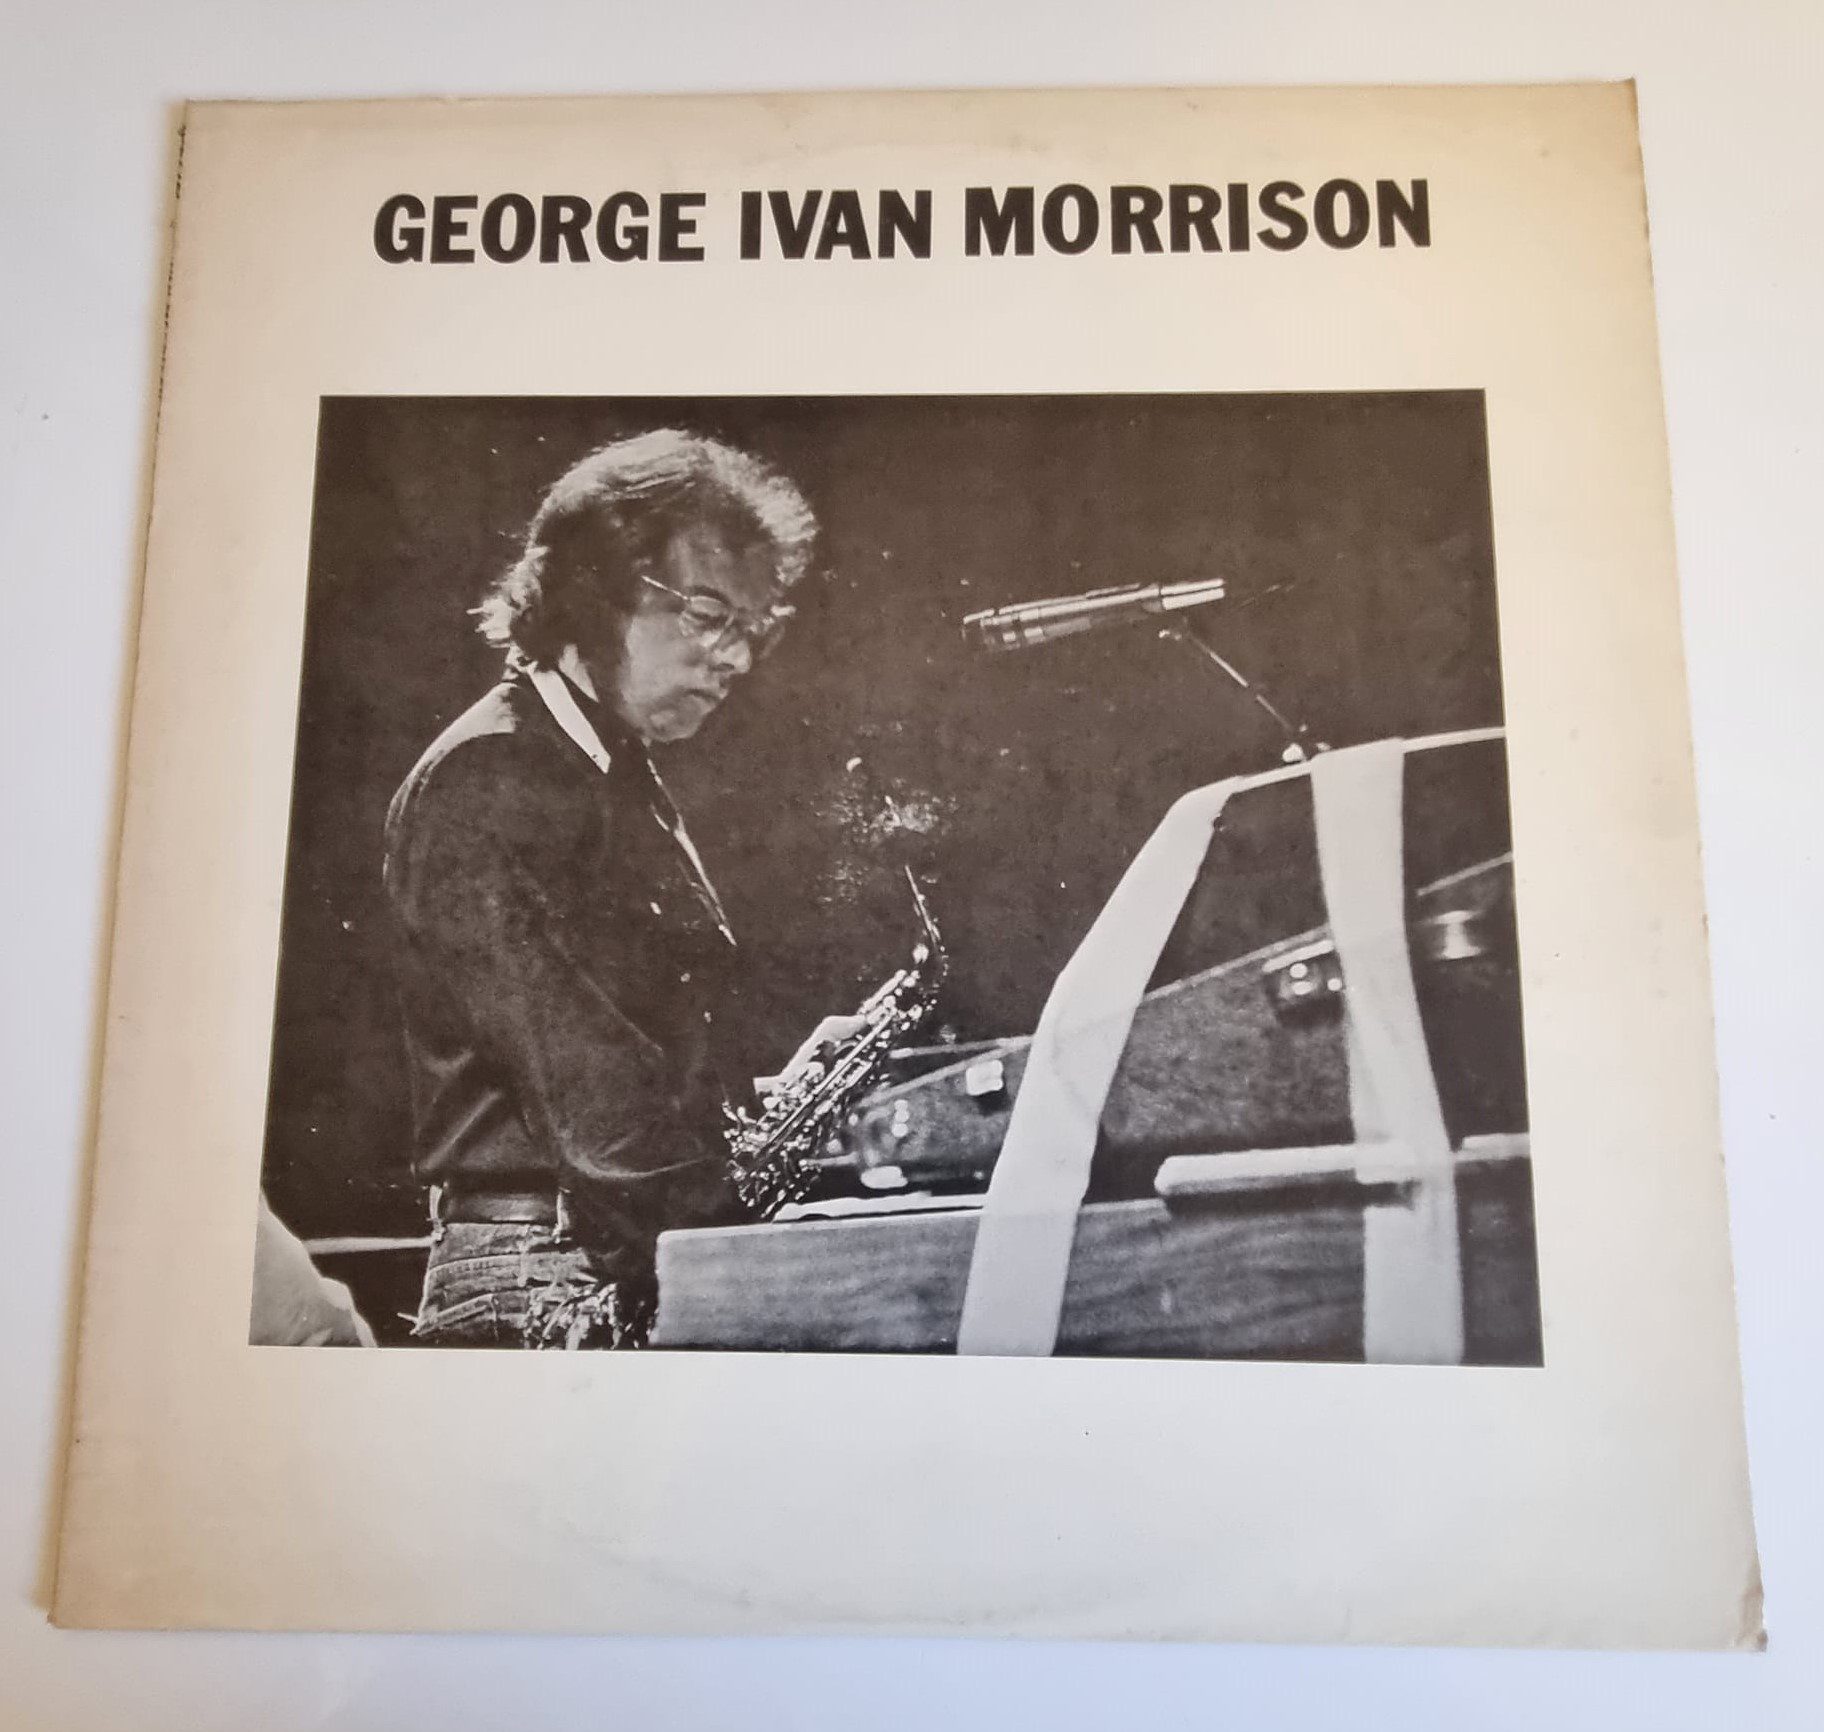 Buy this rare Van Morrison record by clicking here